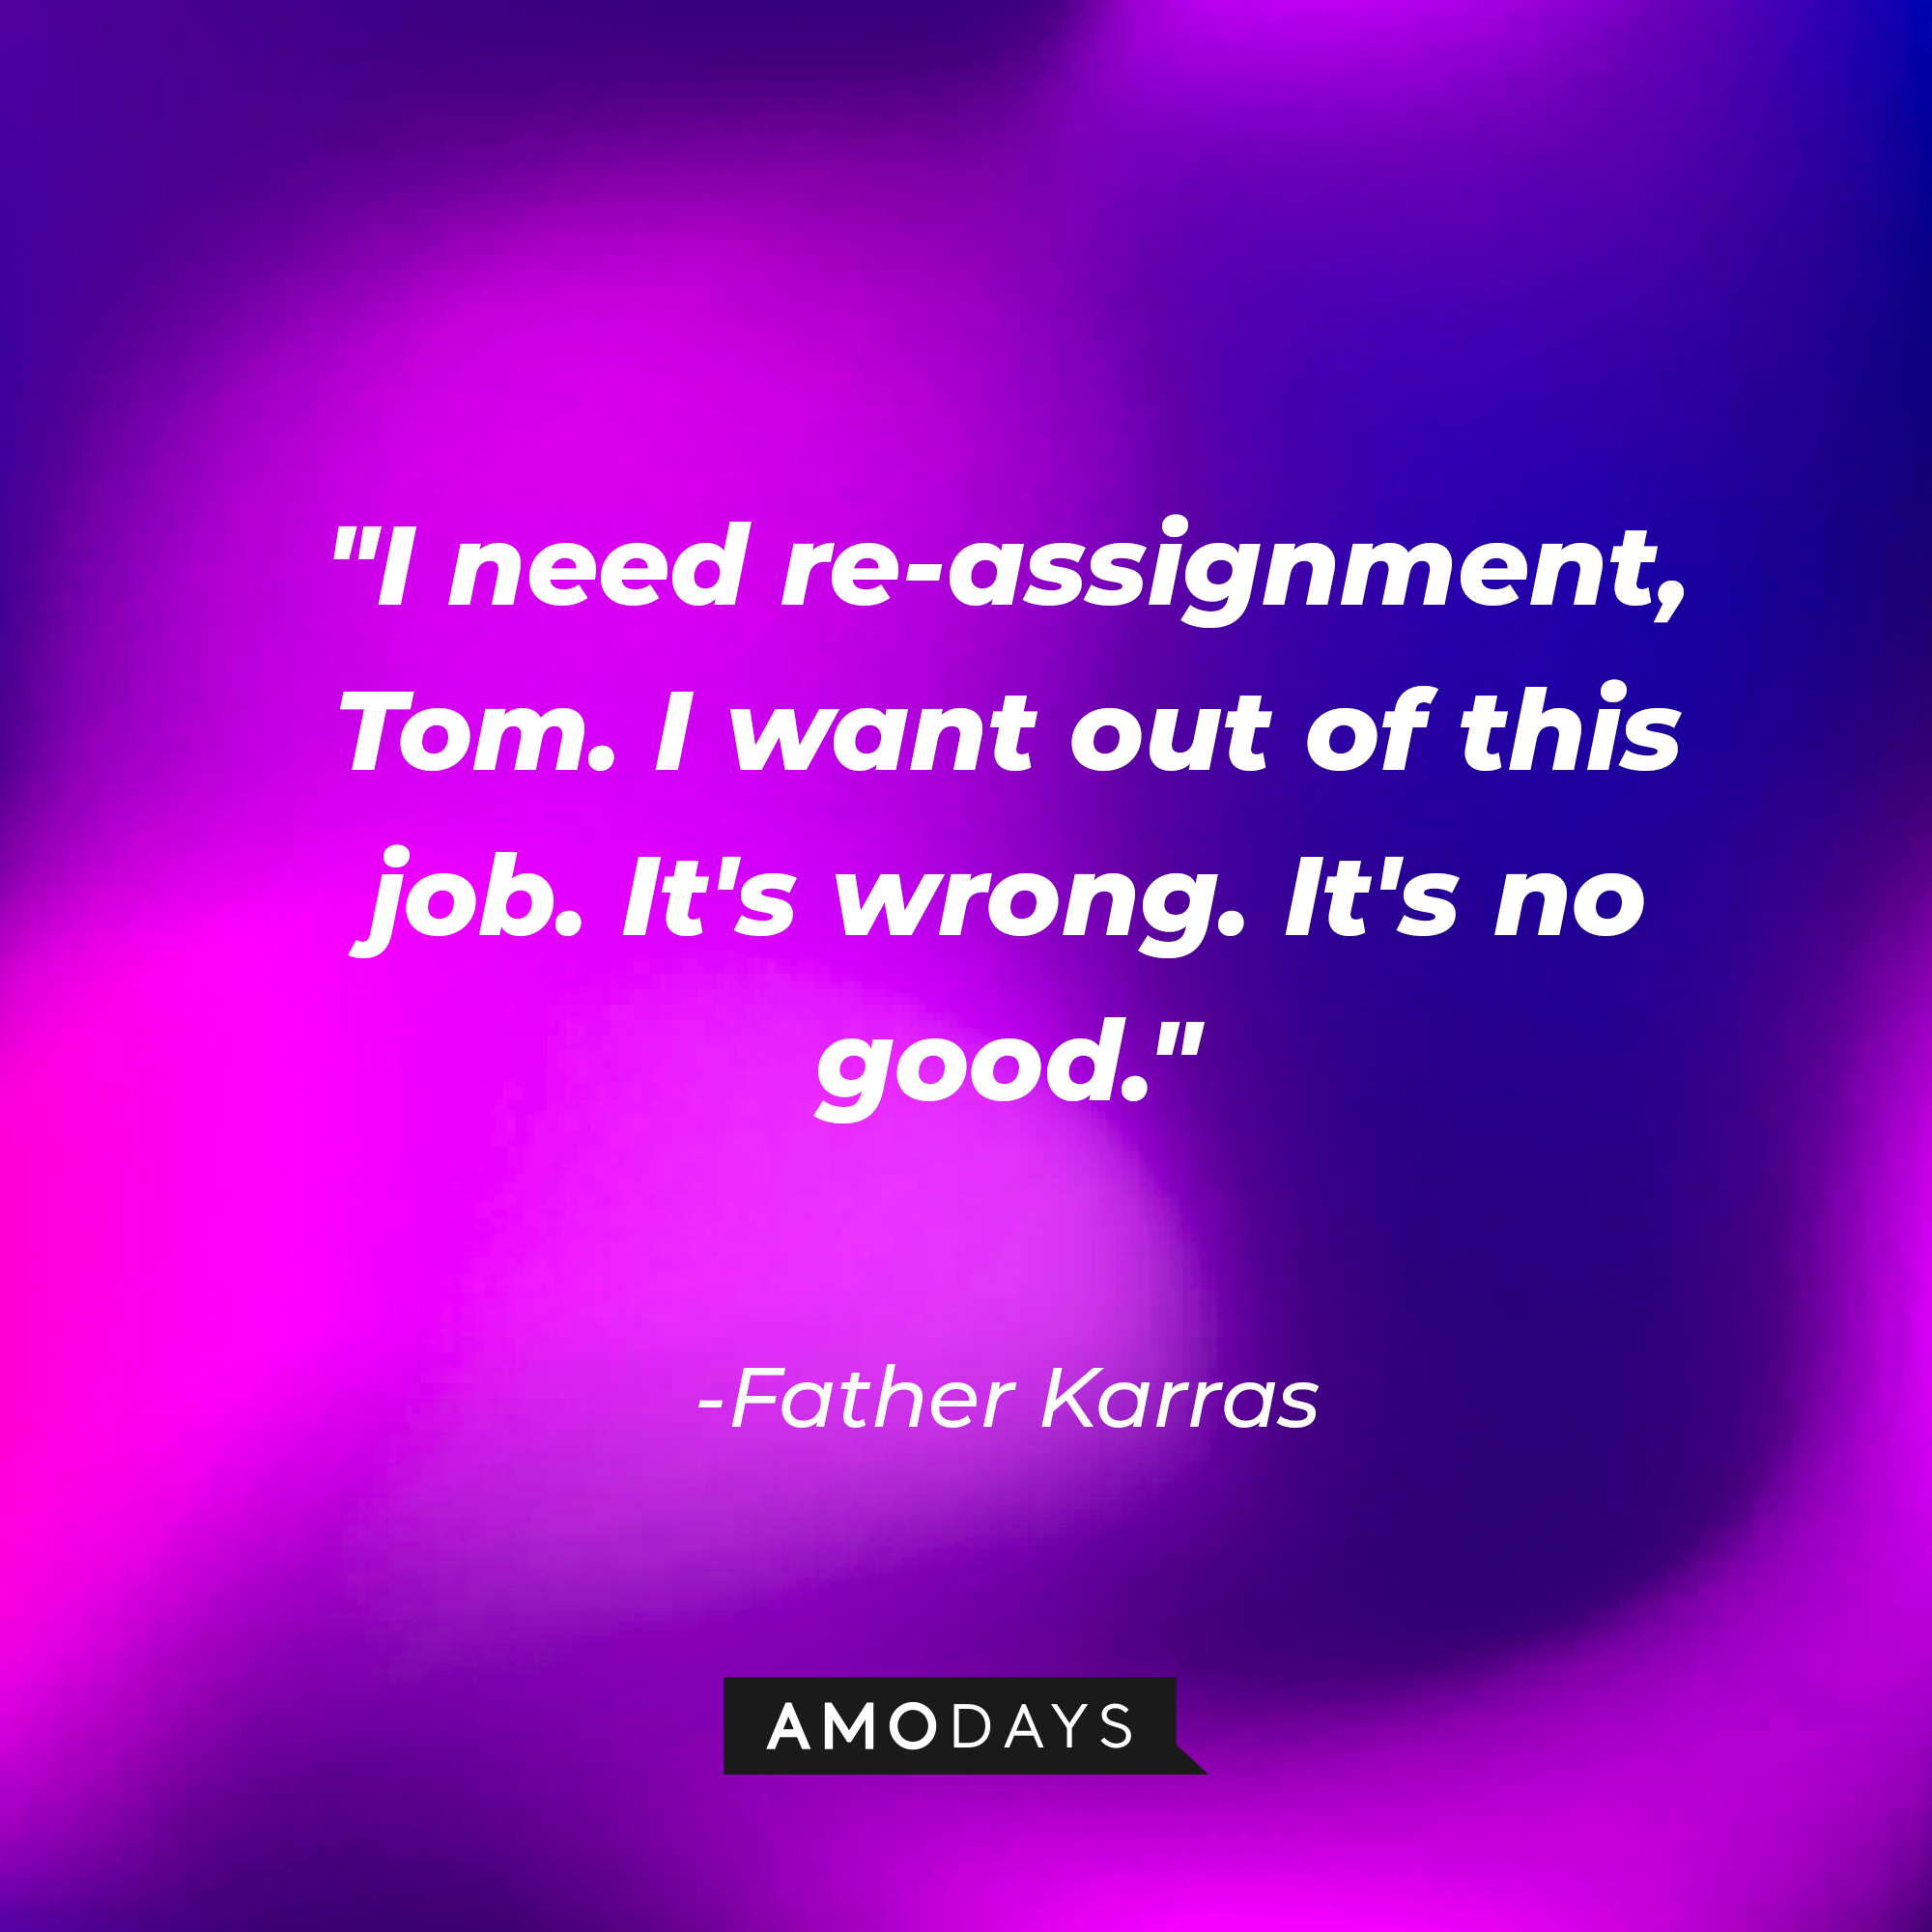 Fathe Karras' quote: "I need re-assignment, Tom. I want out of this job. It's wrong. It's no good." | Source: AmoDAys